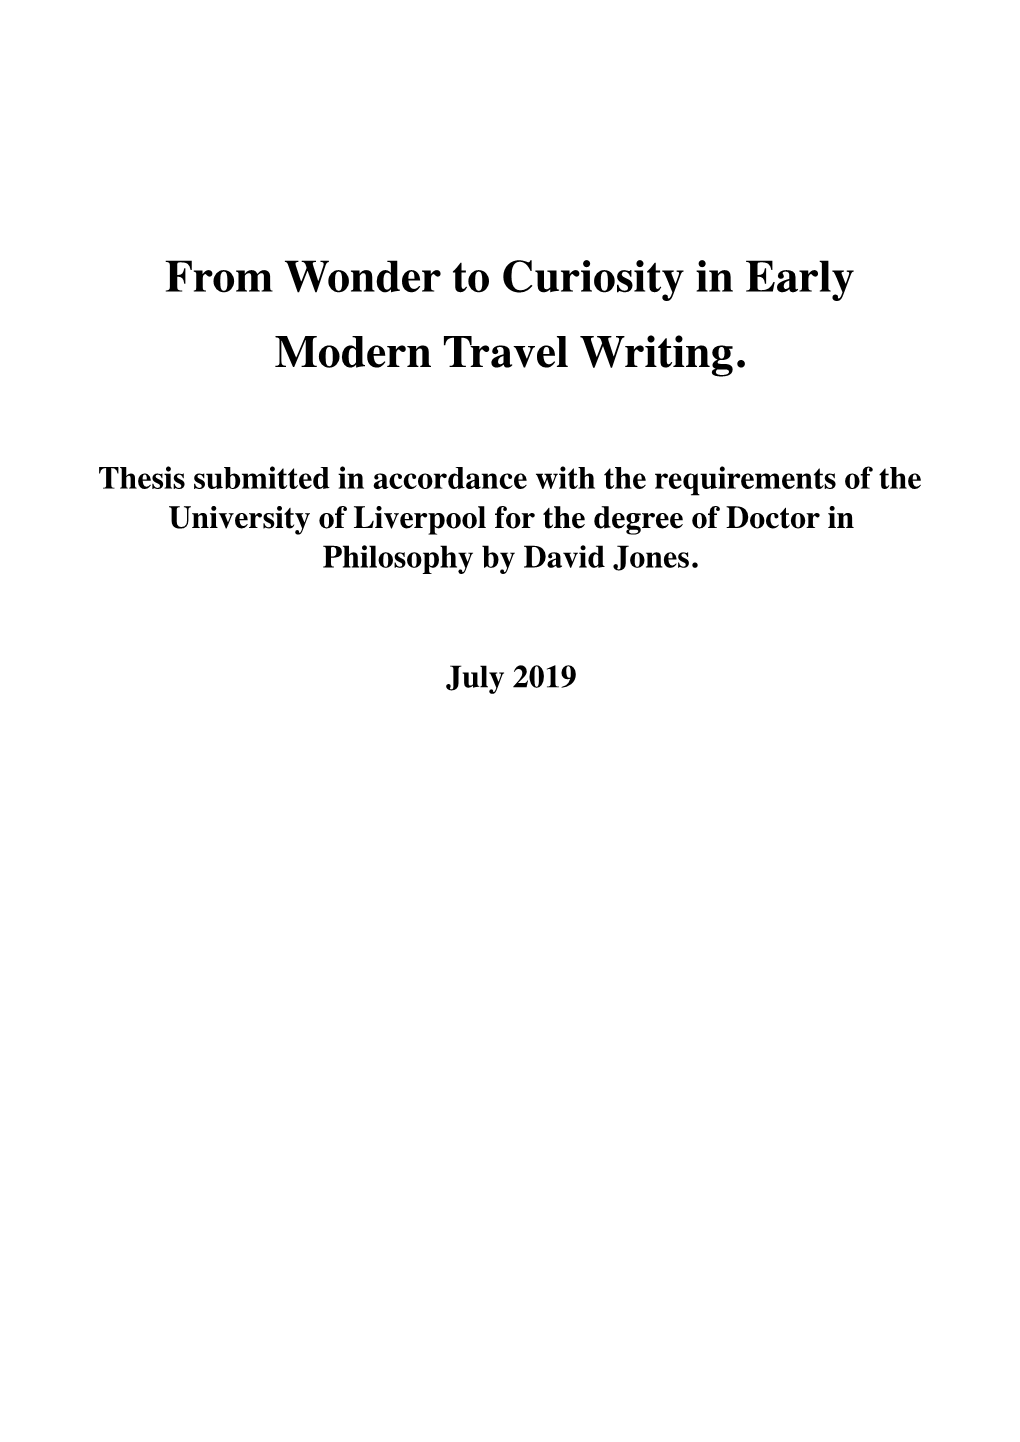 From Wonder to Curiosity in Early Modern Travel Writing